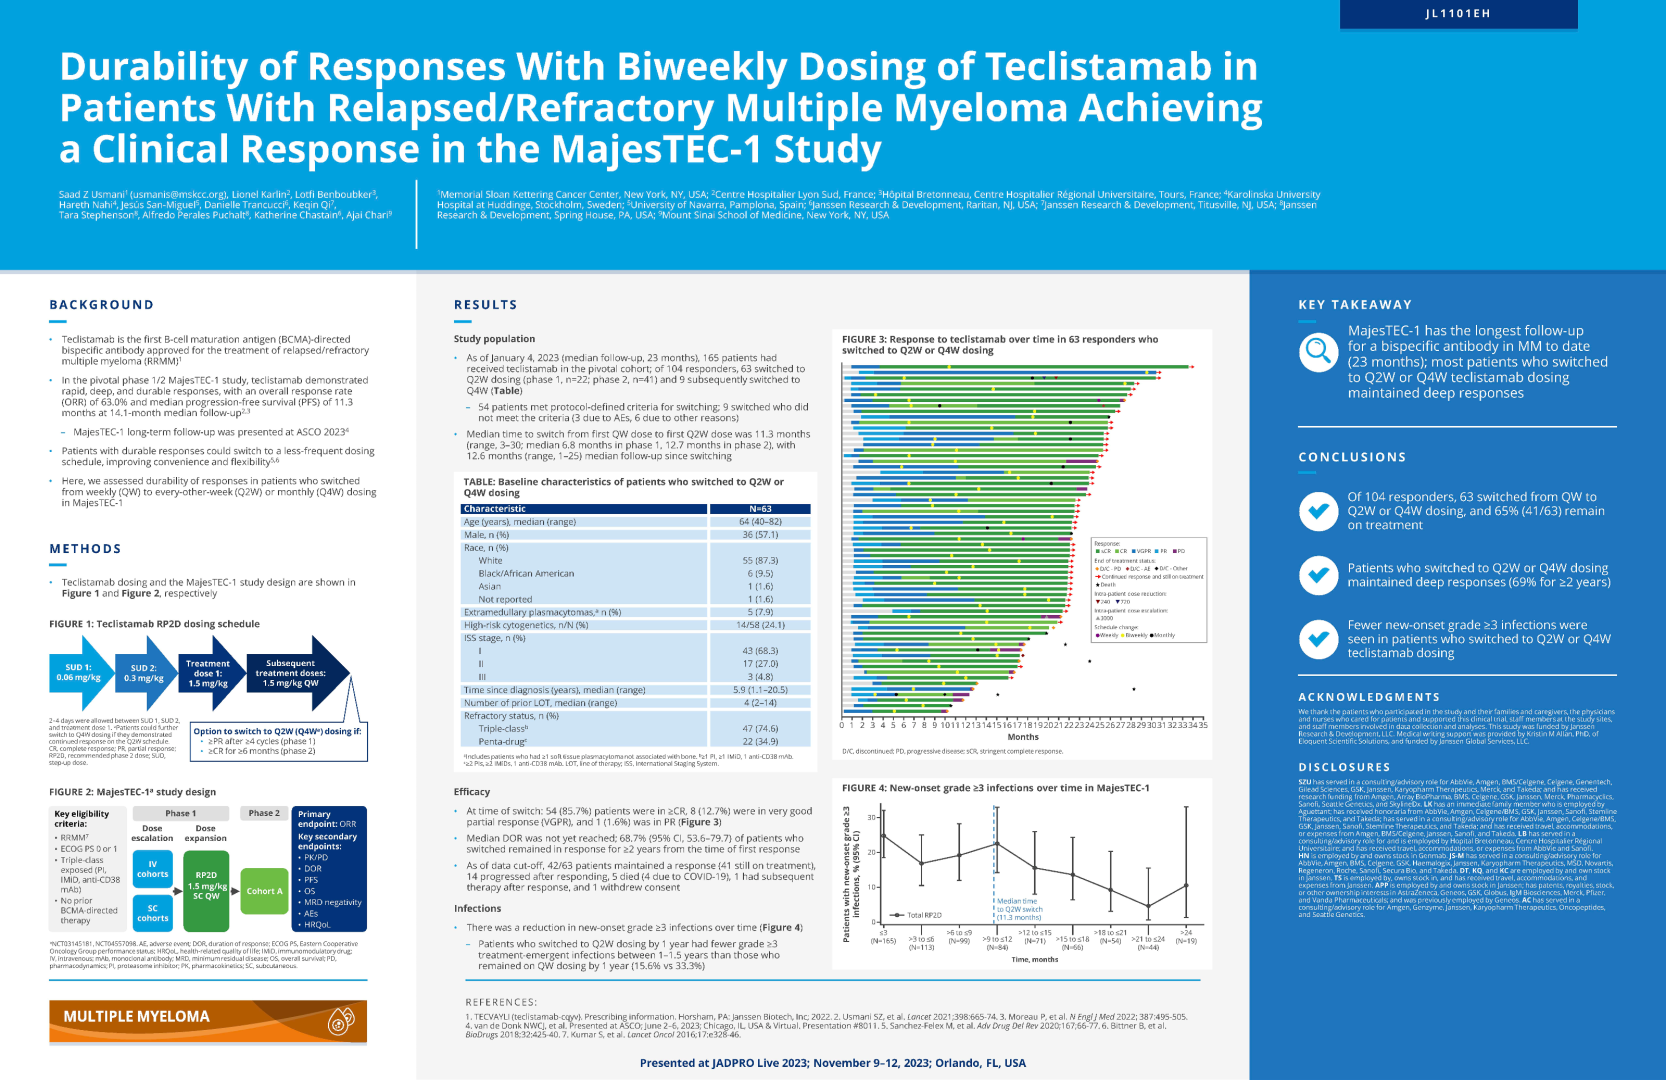 JL1101EH: Durability of Responses With Biweekly Dosing of Teclistamab in Patients With Relapsed/Refractory Multiple Myeloma Achieving a Clinical Response in the MajesTEC-1 Study icon